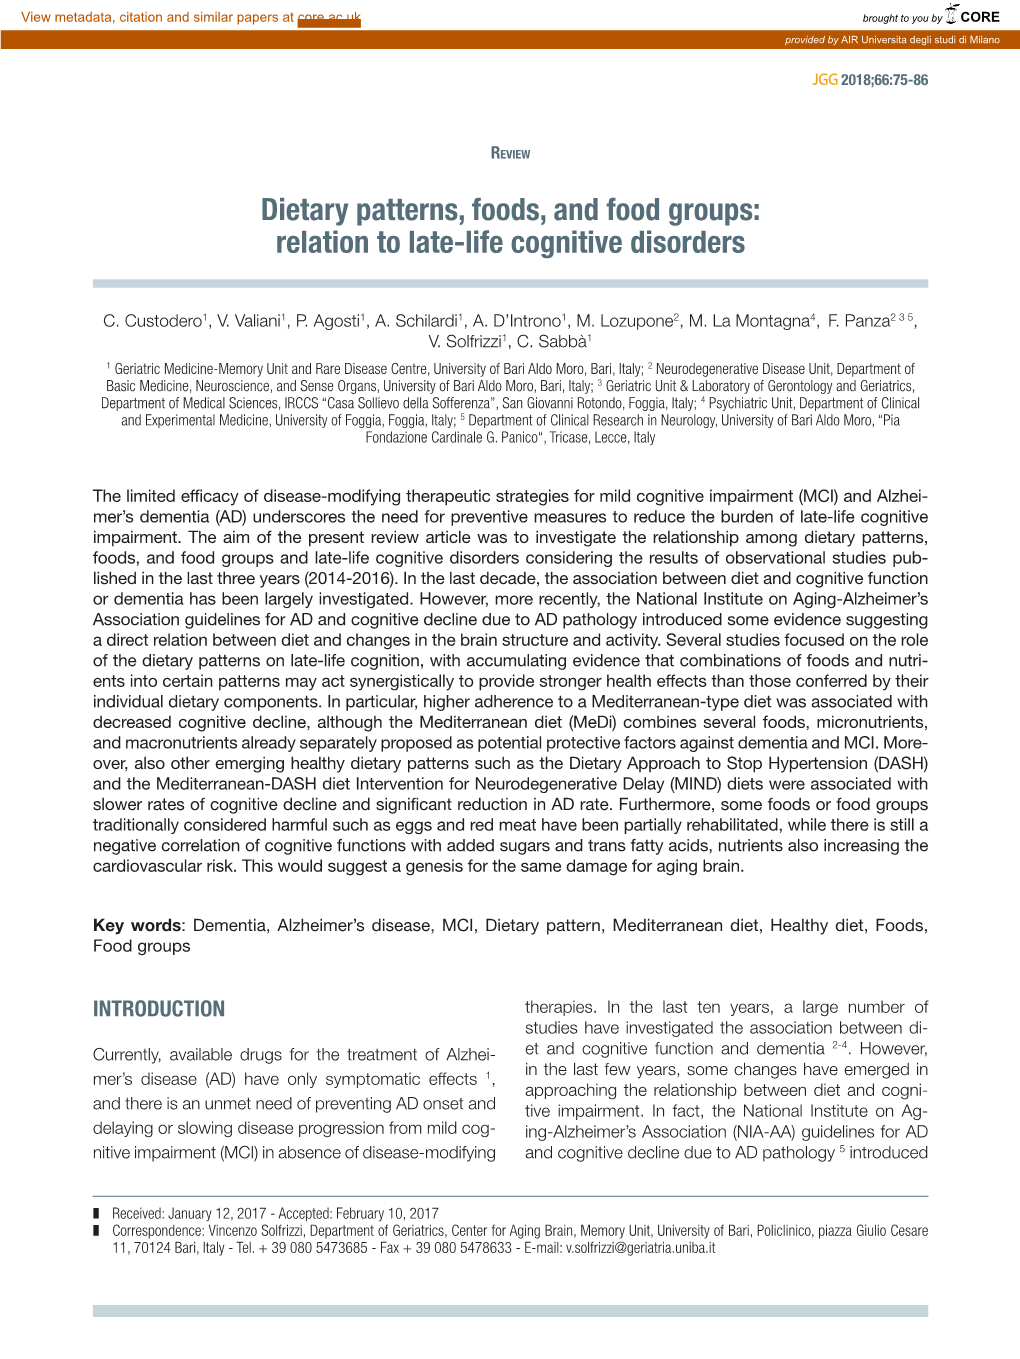 Dietary Patterns, Foods, and Food Groups: Relation to Late-Life Cognitive Disorders